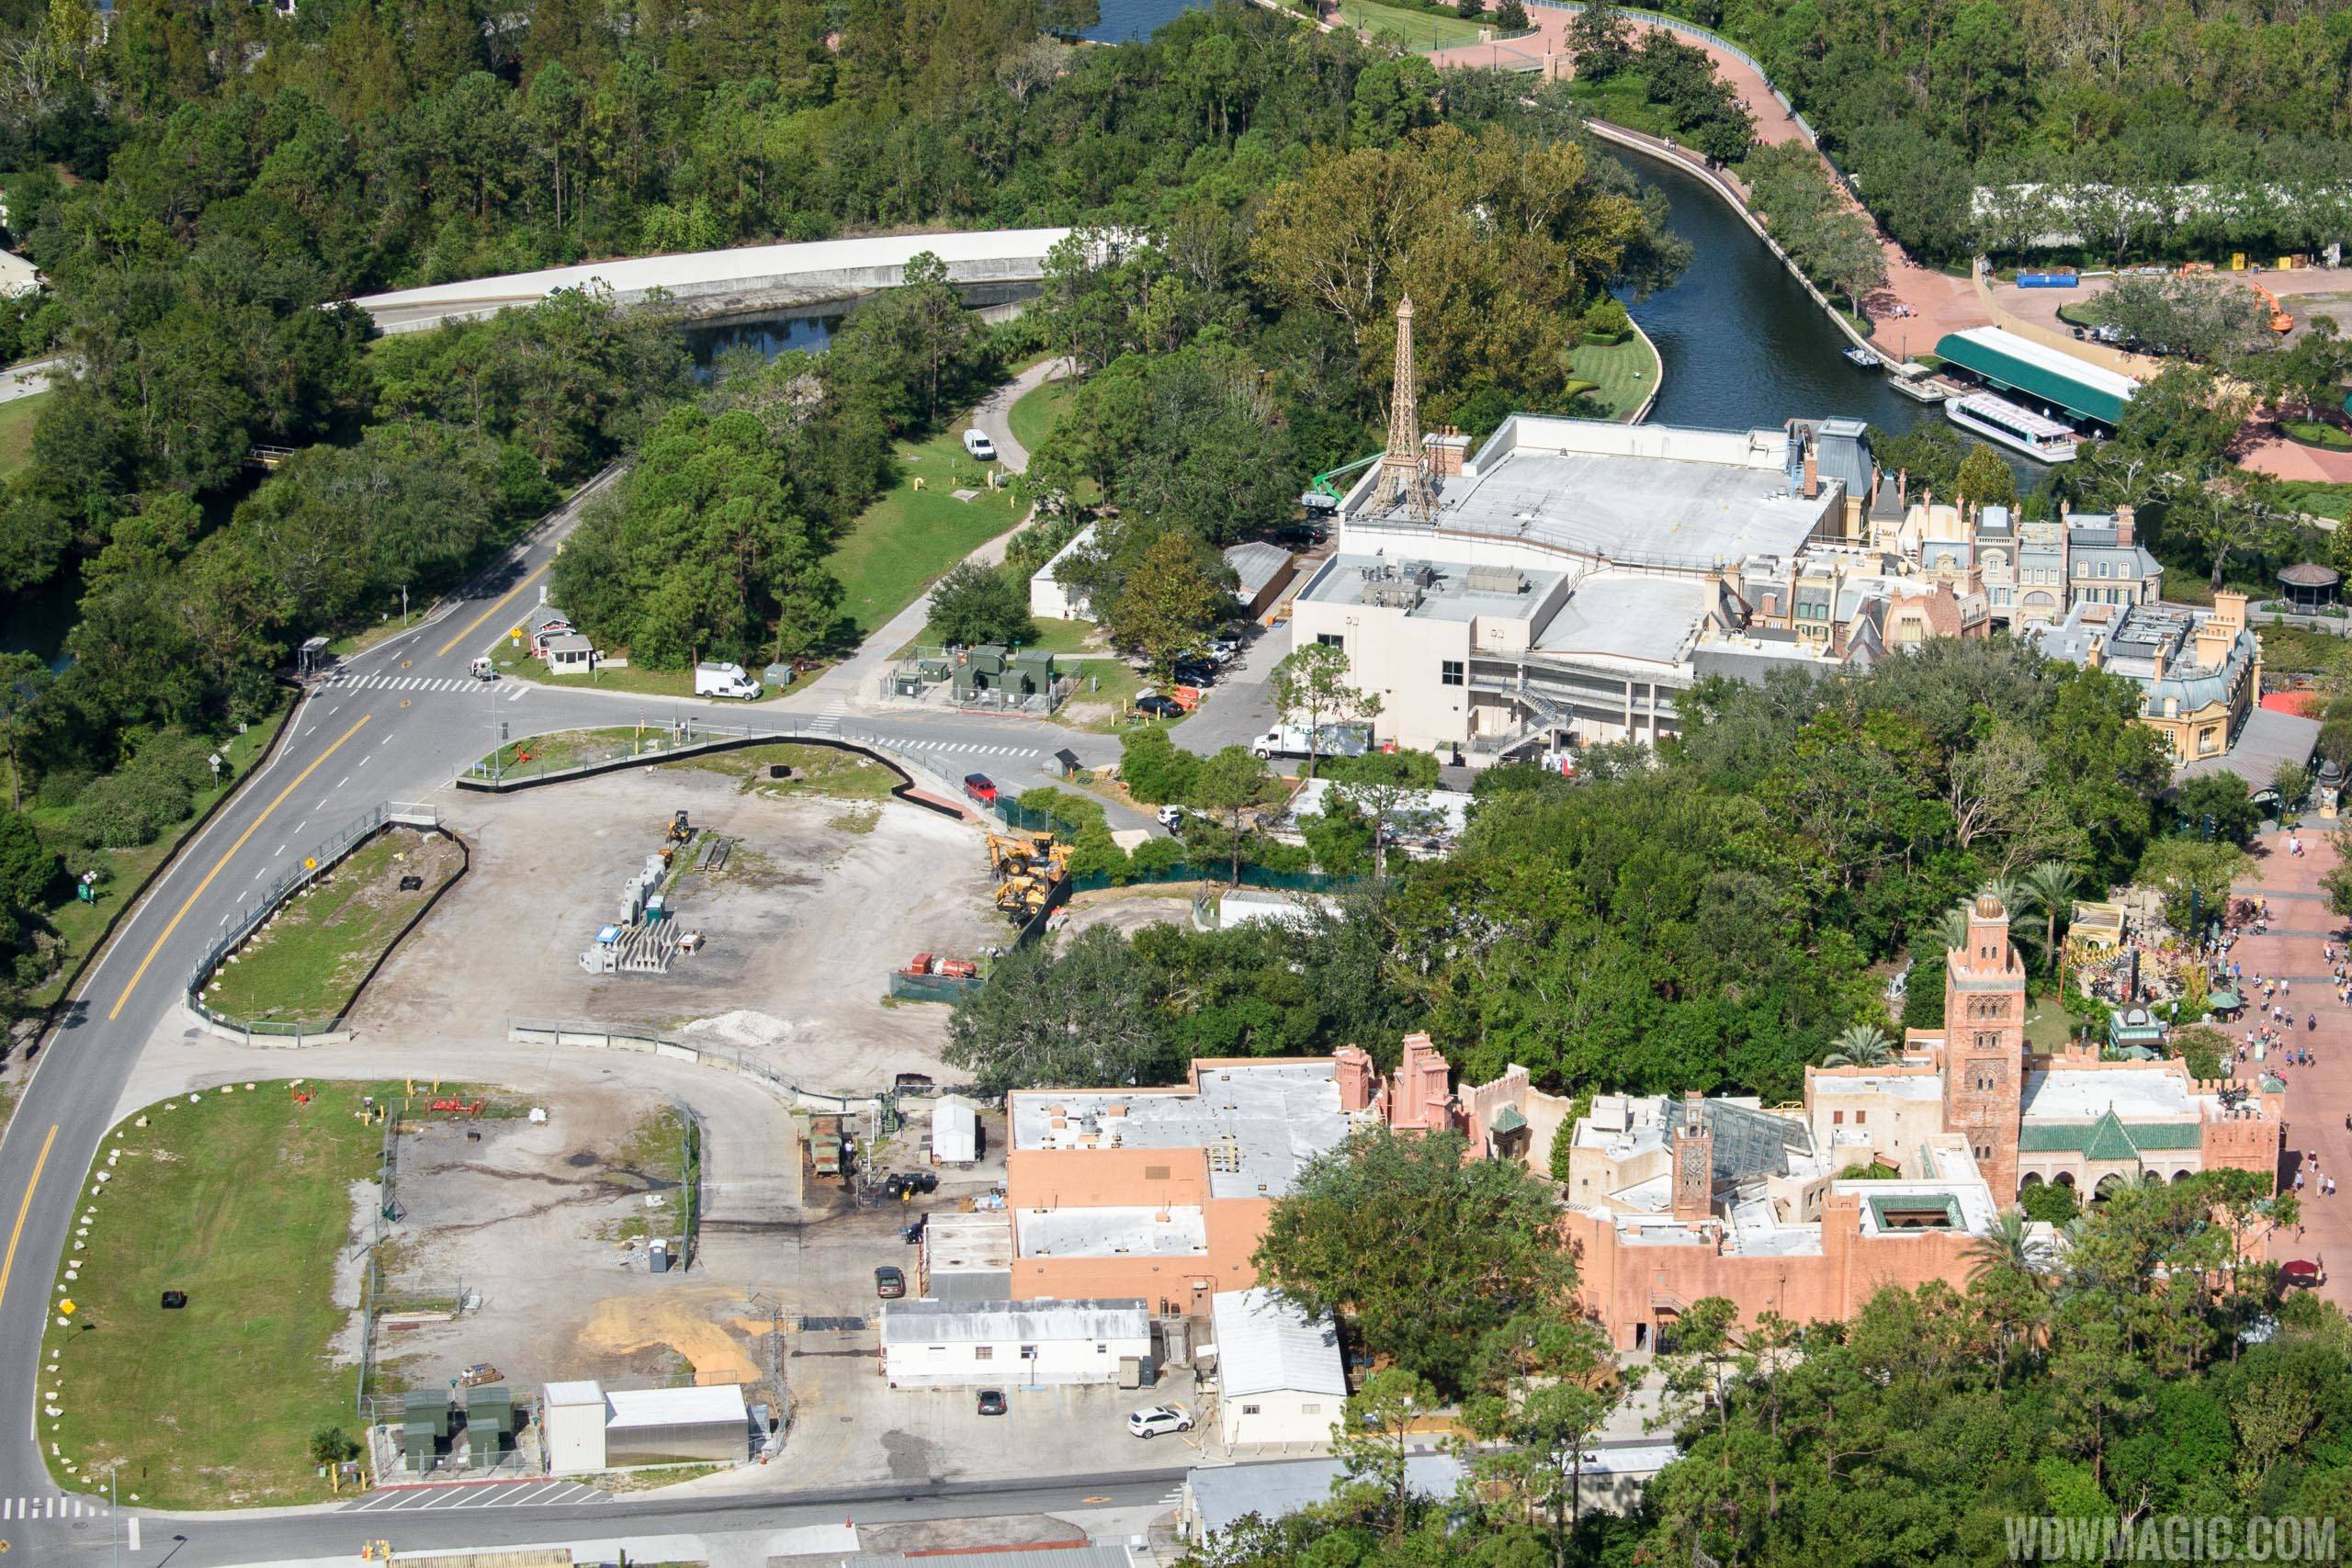 Ratatouille construction site from the air